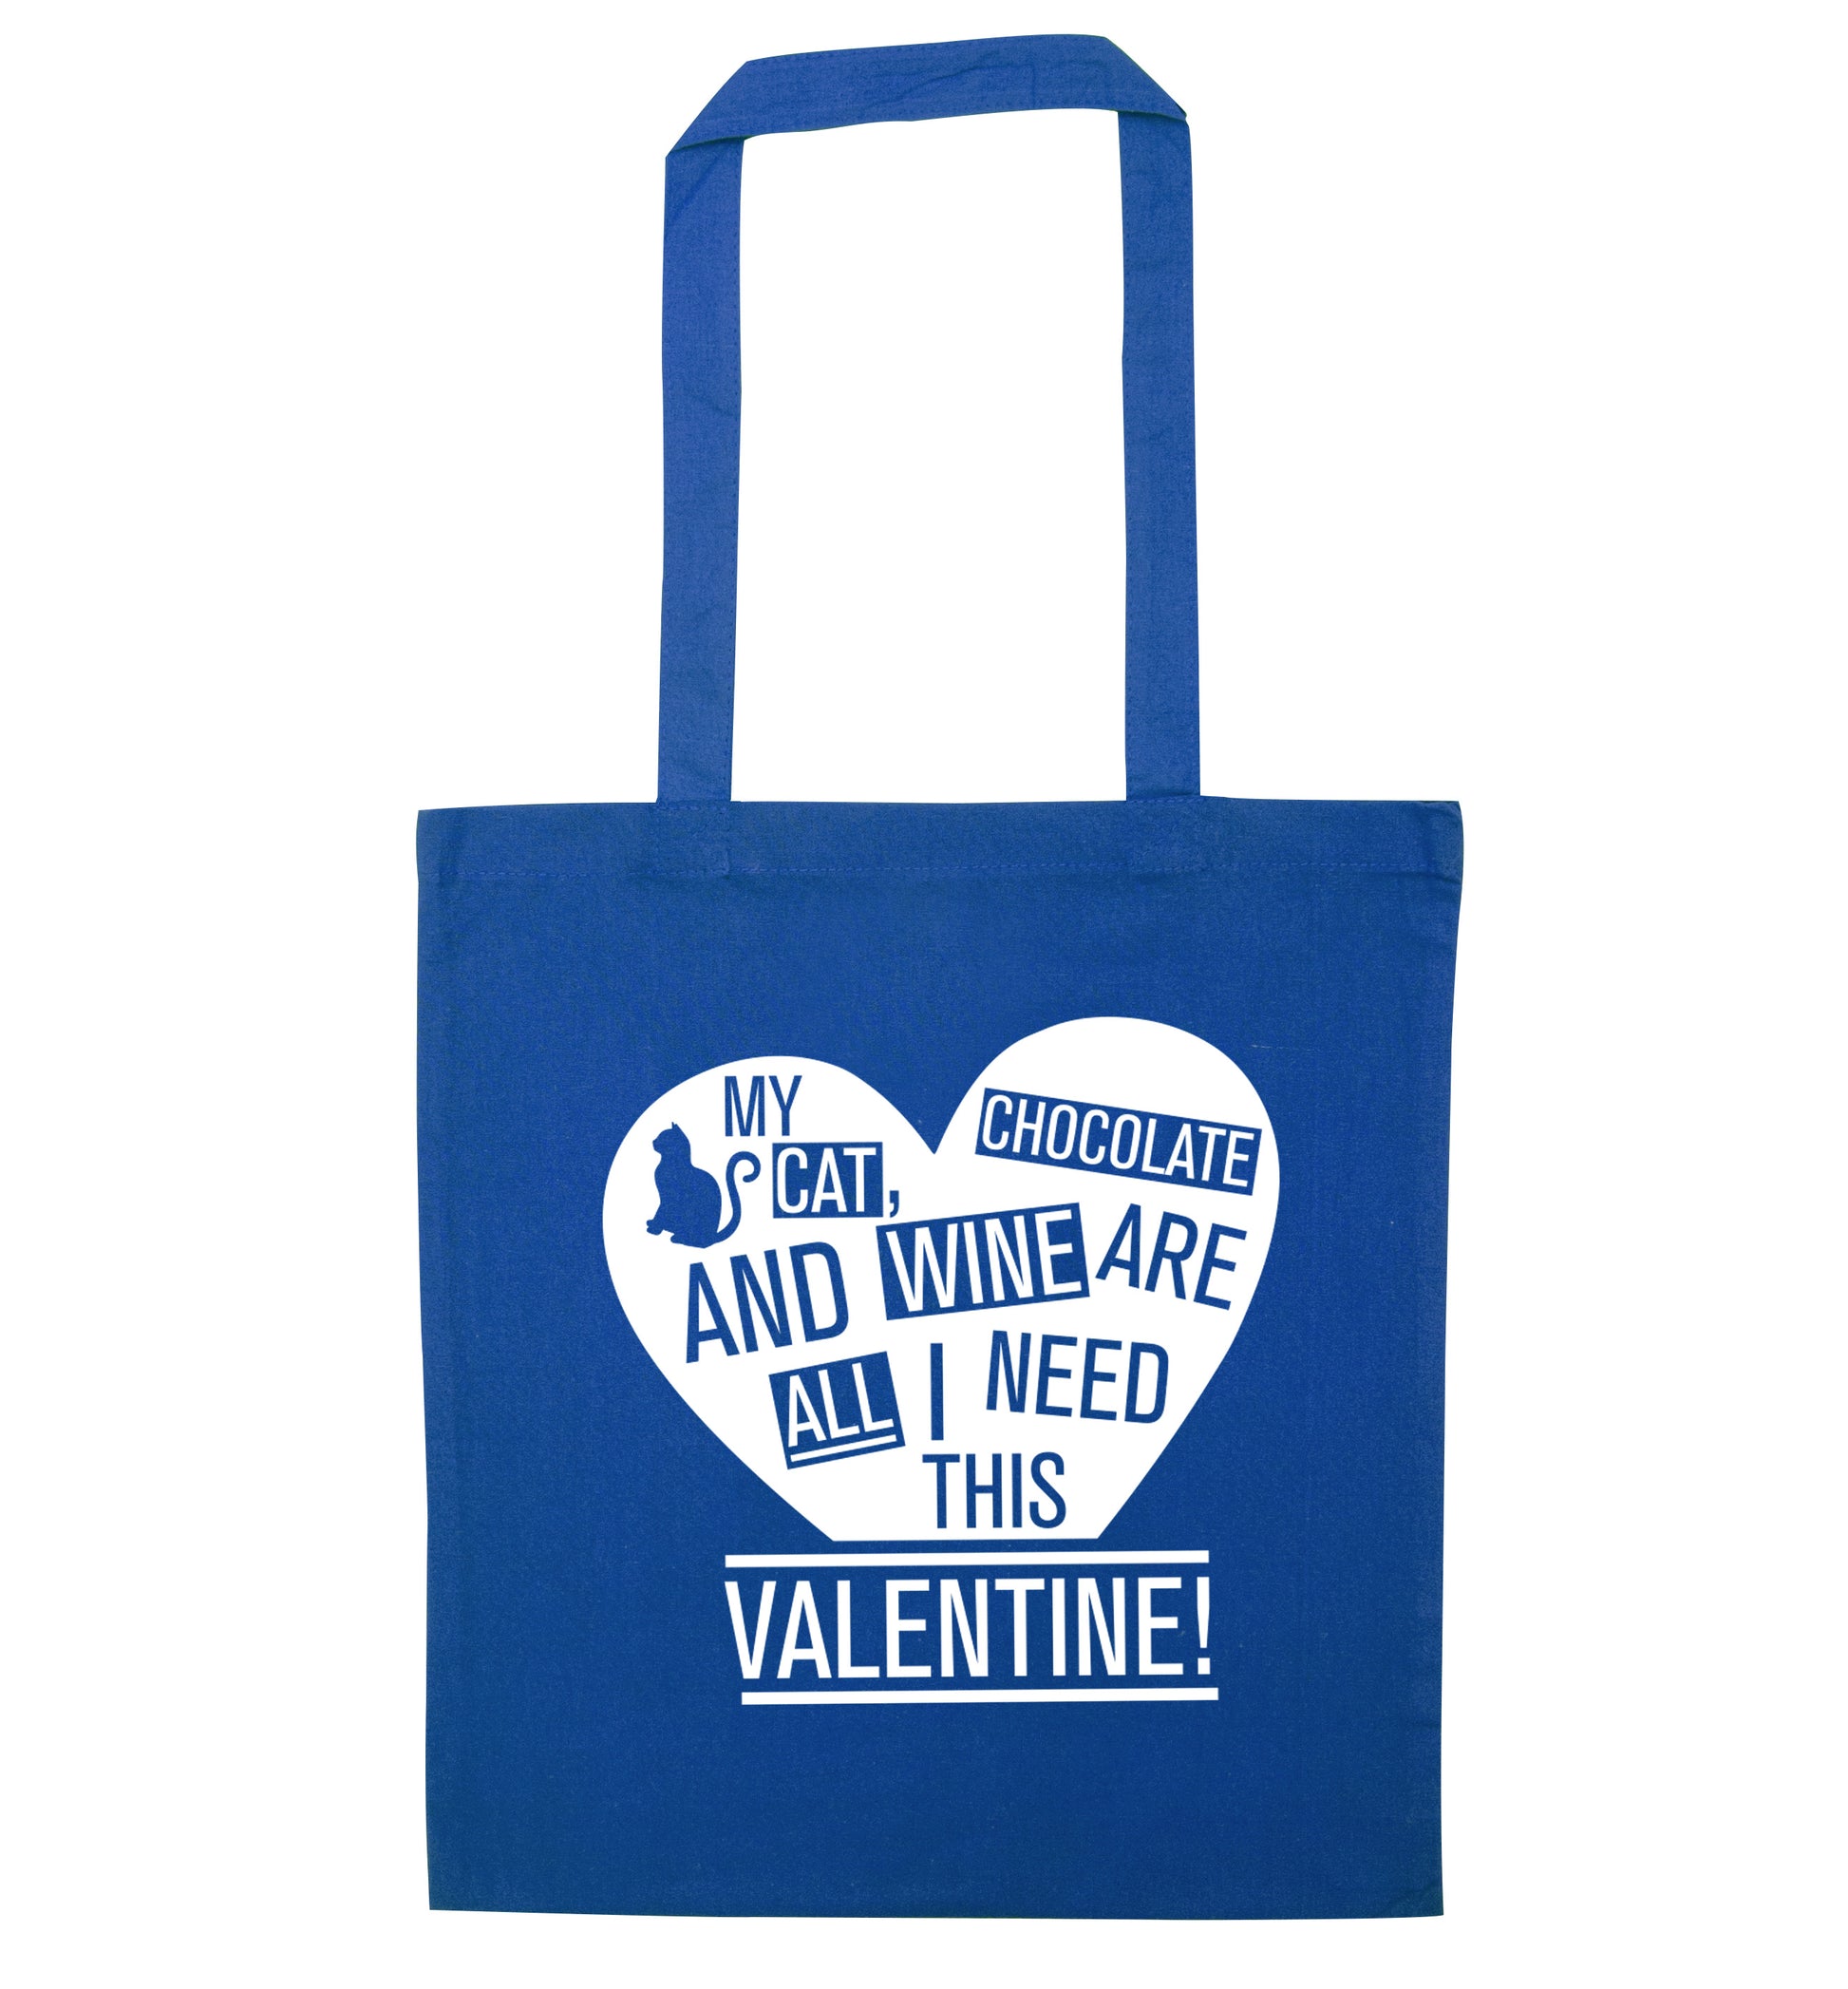 My cat, chocolate and wine are all I need this valentine! blue tote bag